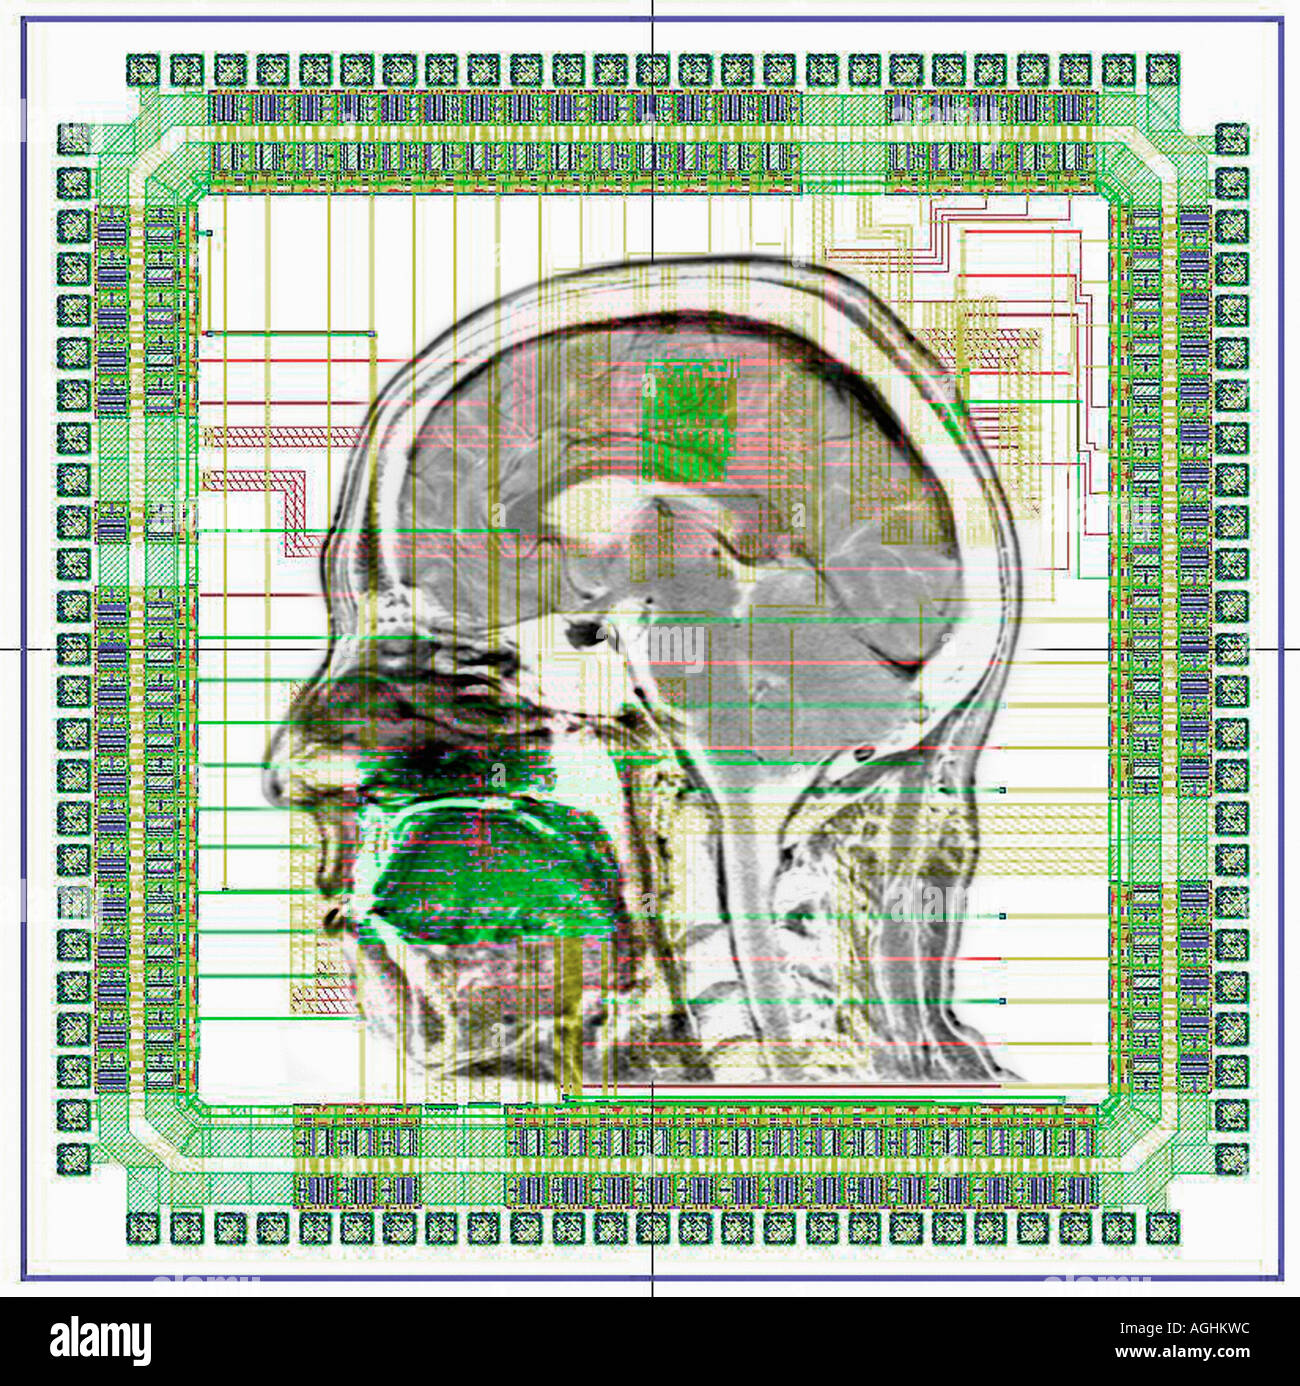 image of the connection between a microprocessor and a human brain symbolizing artificial intelligence Stock Photo